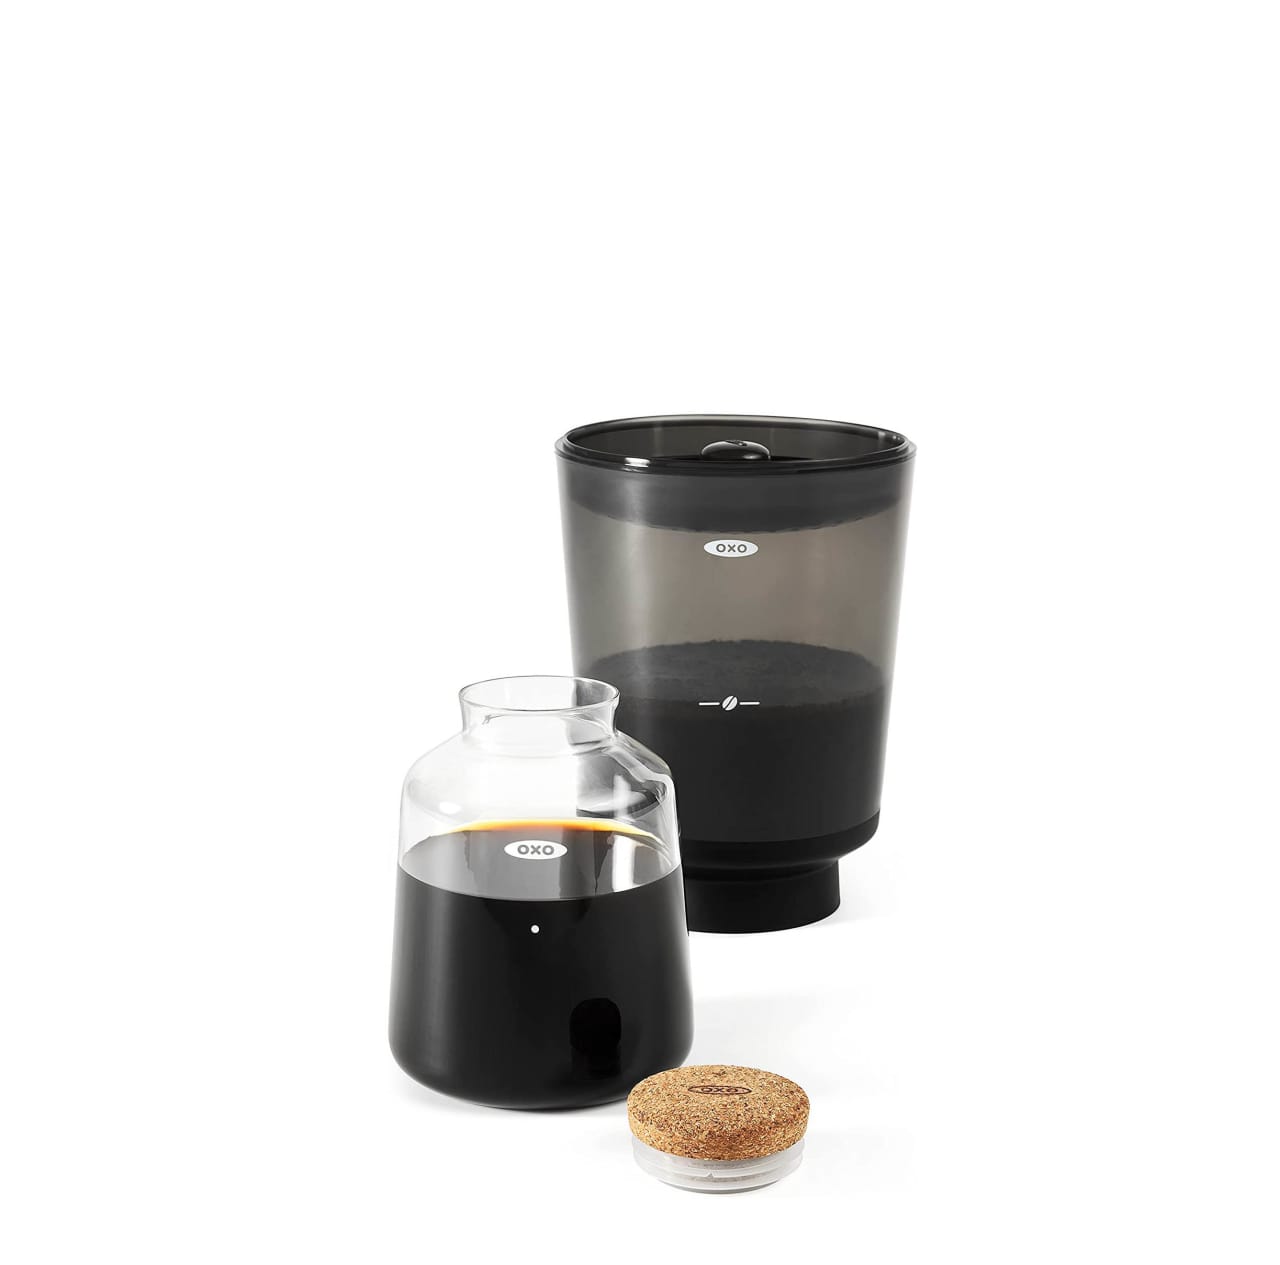 Cold Brew Coffee Beans, Buy Yeti Cold Brew Online